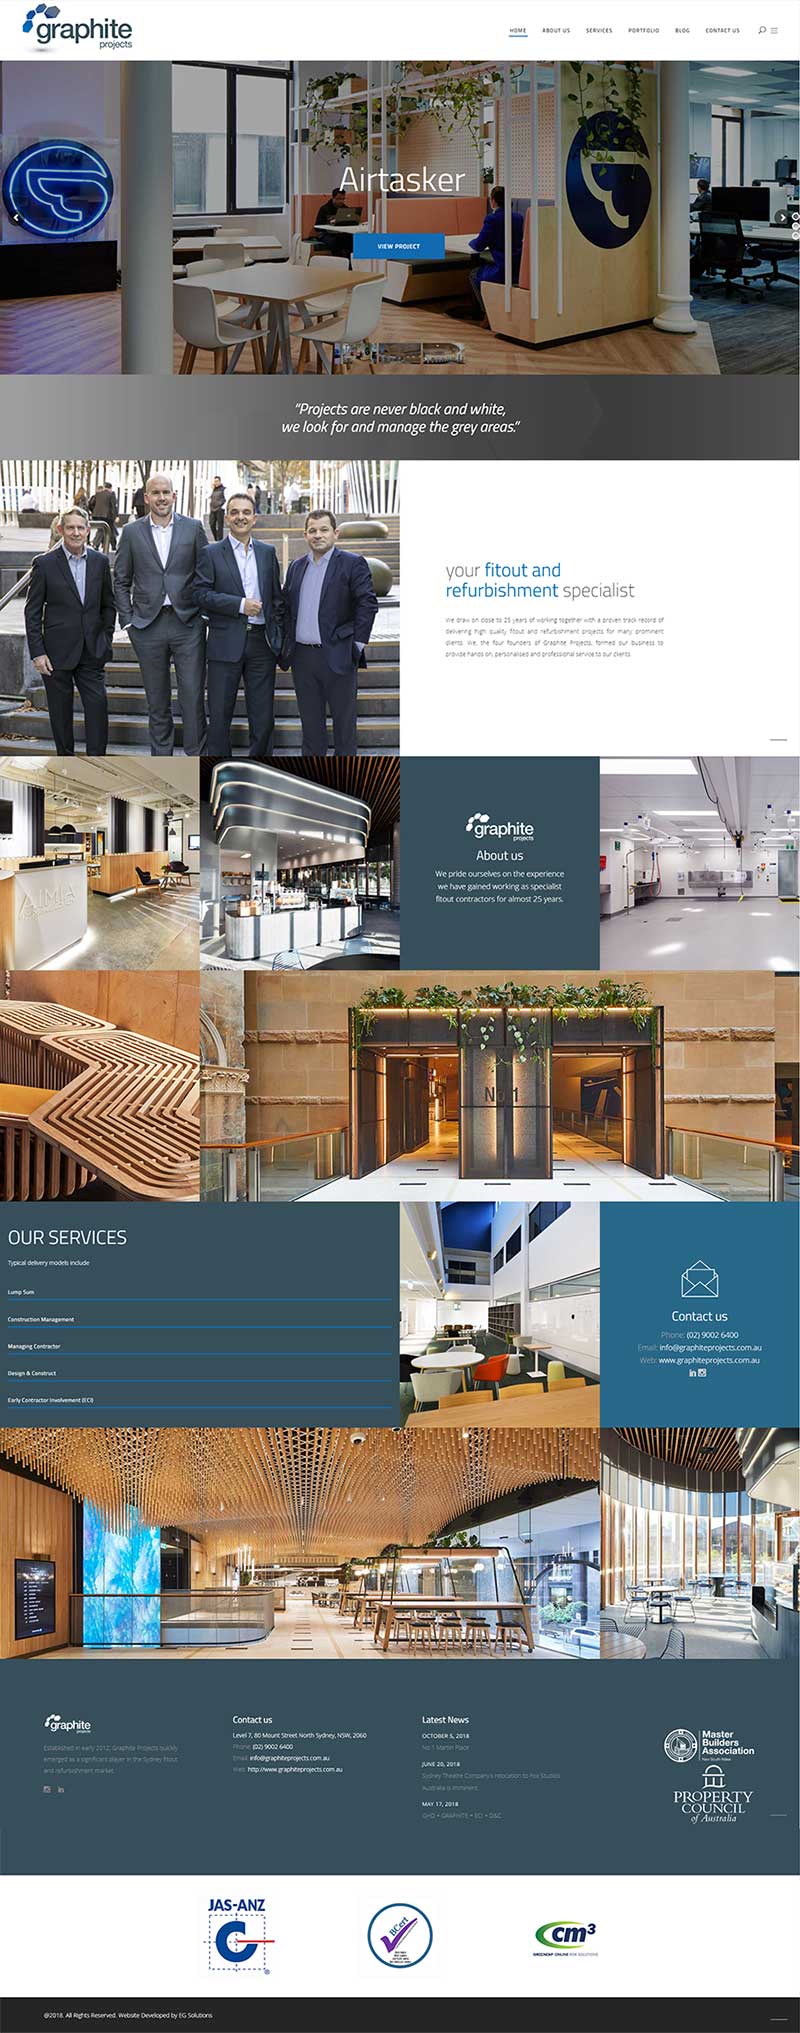 Graphite Projects - Homepage Design